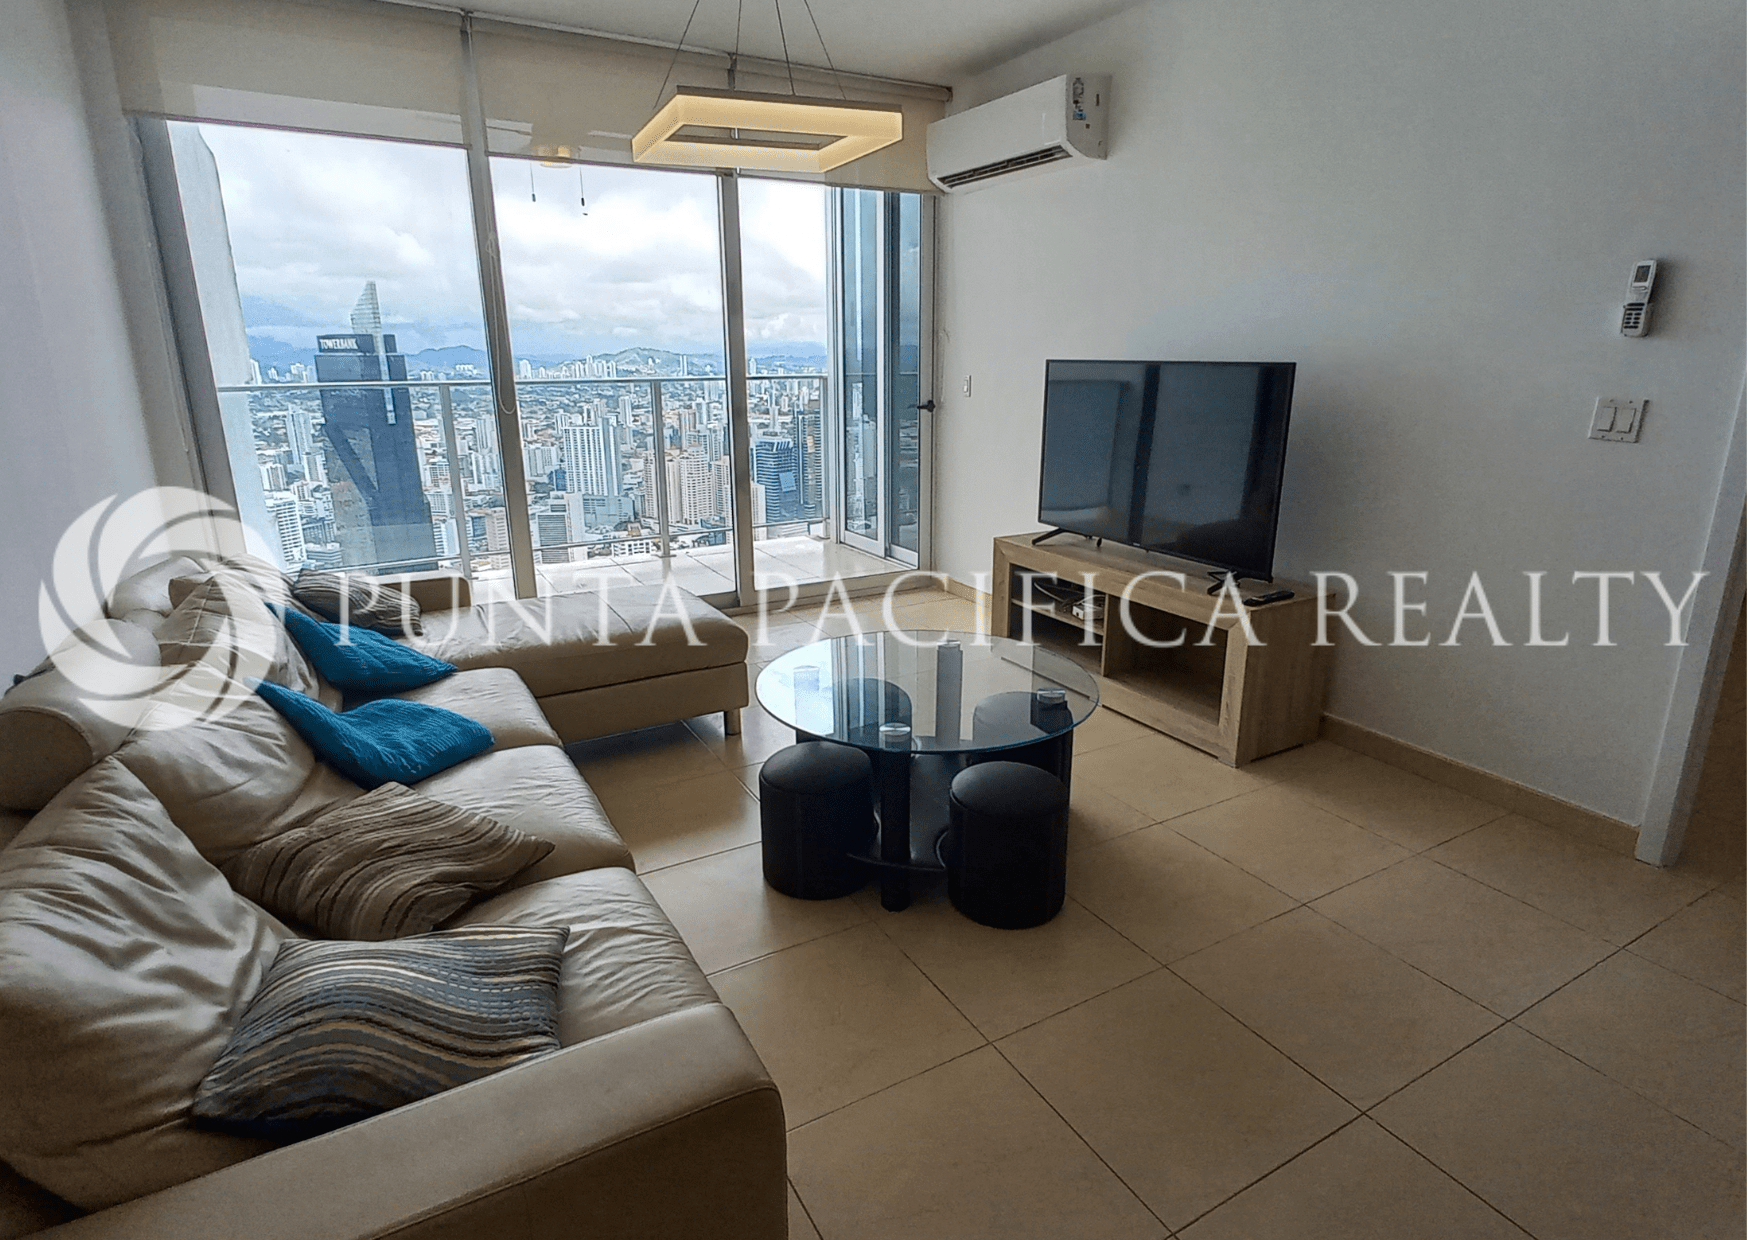 For Sale & For Rent | Spectacular Views From This 1 Bedroom | Waters on ...